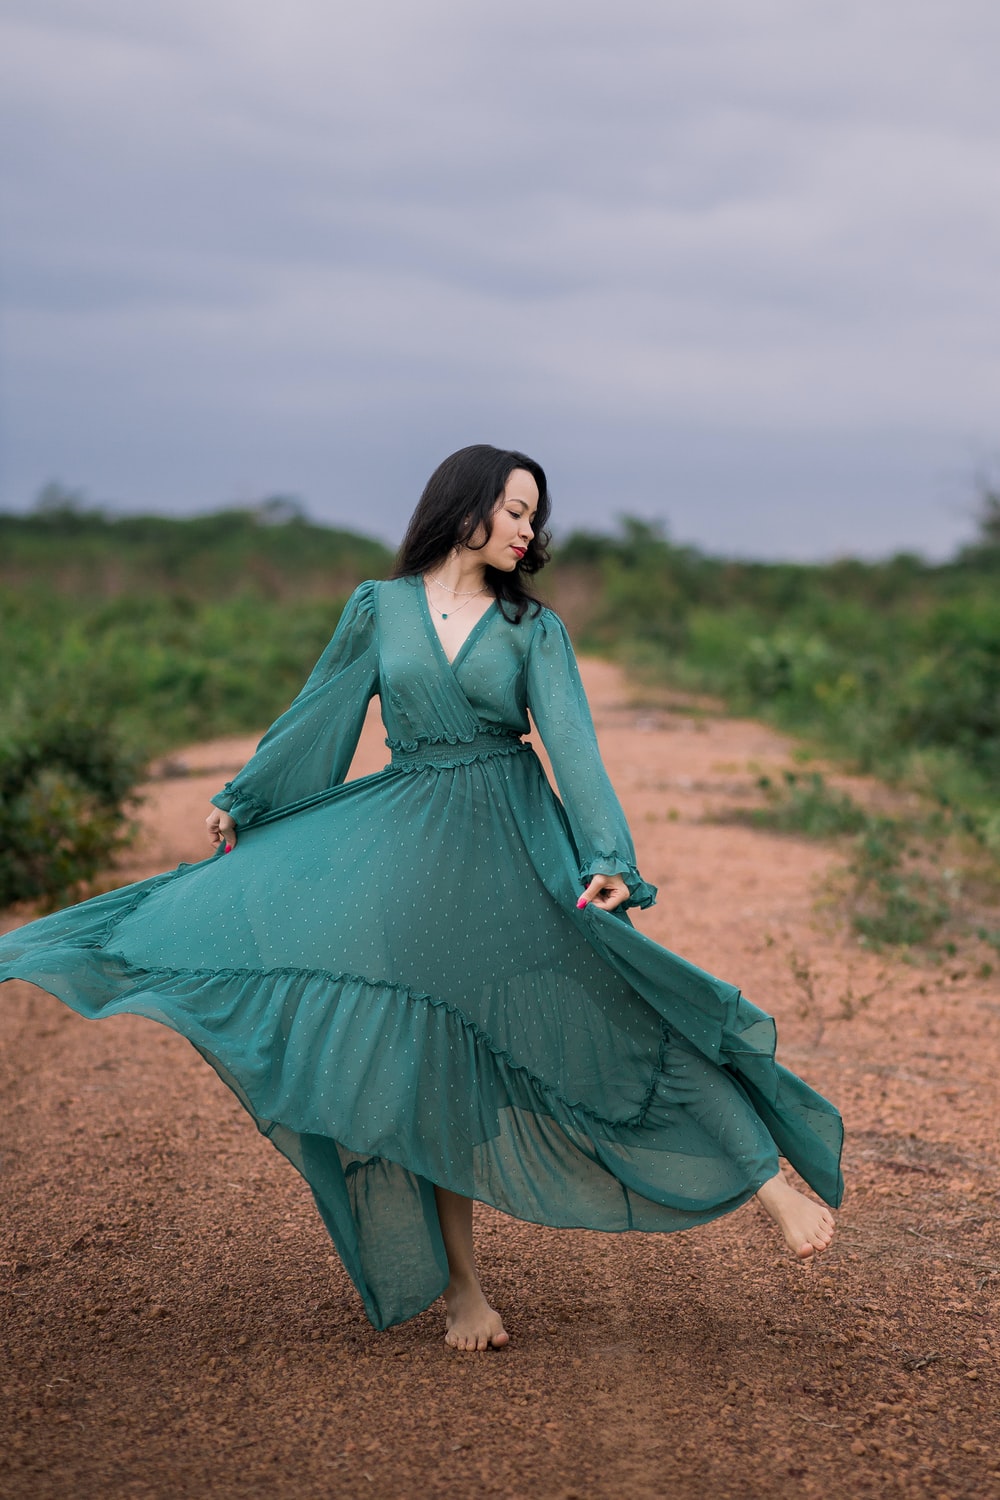 Long Dress Picture. Download Free Image